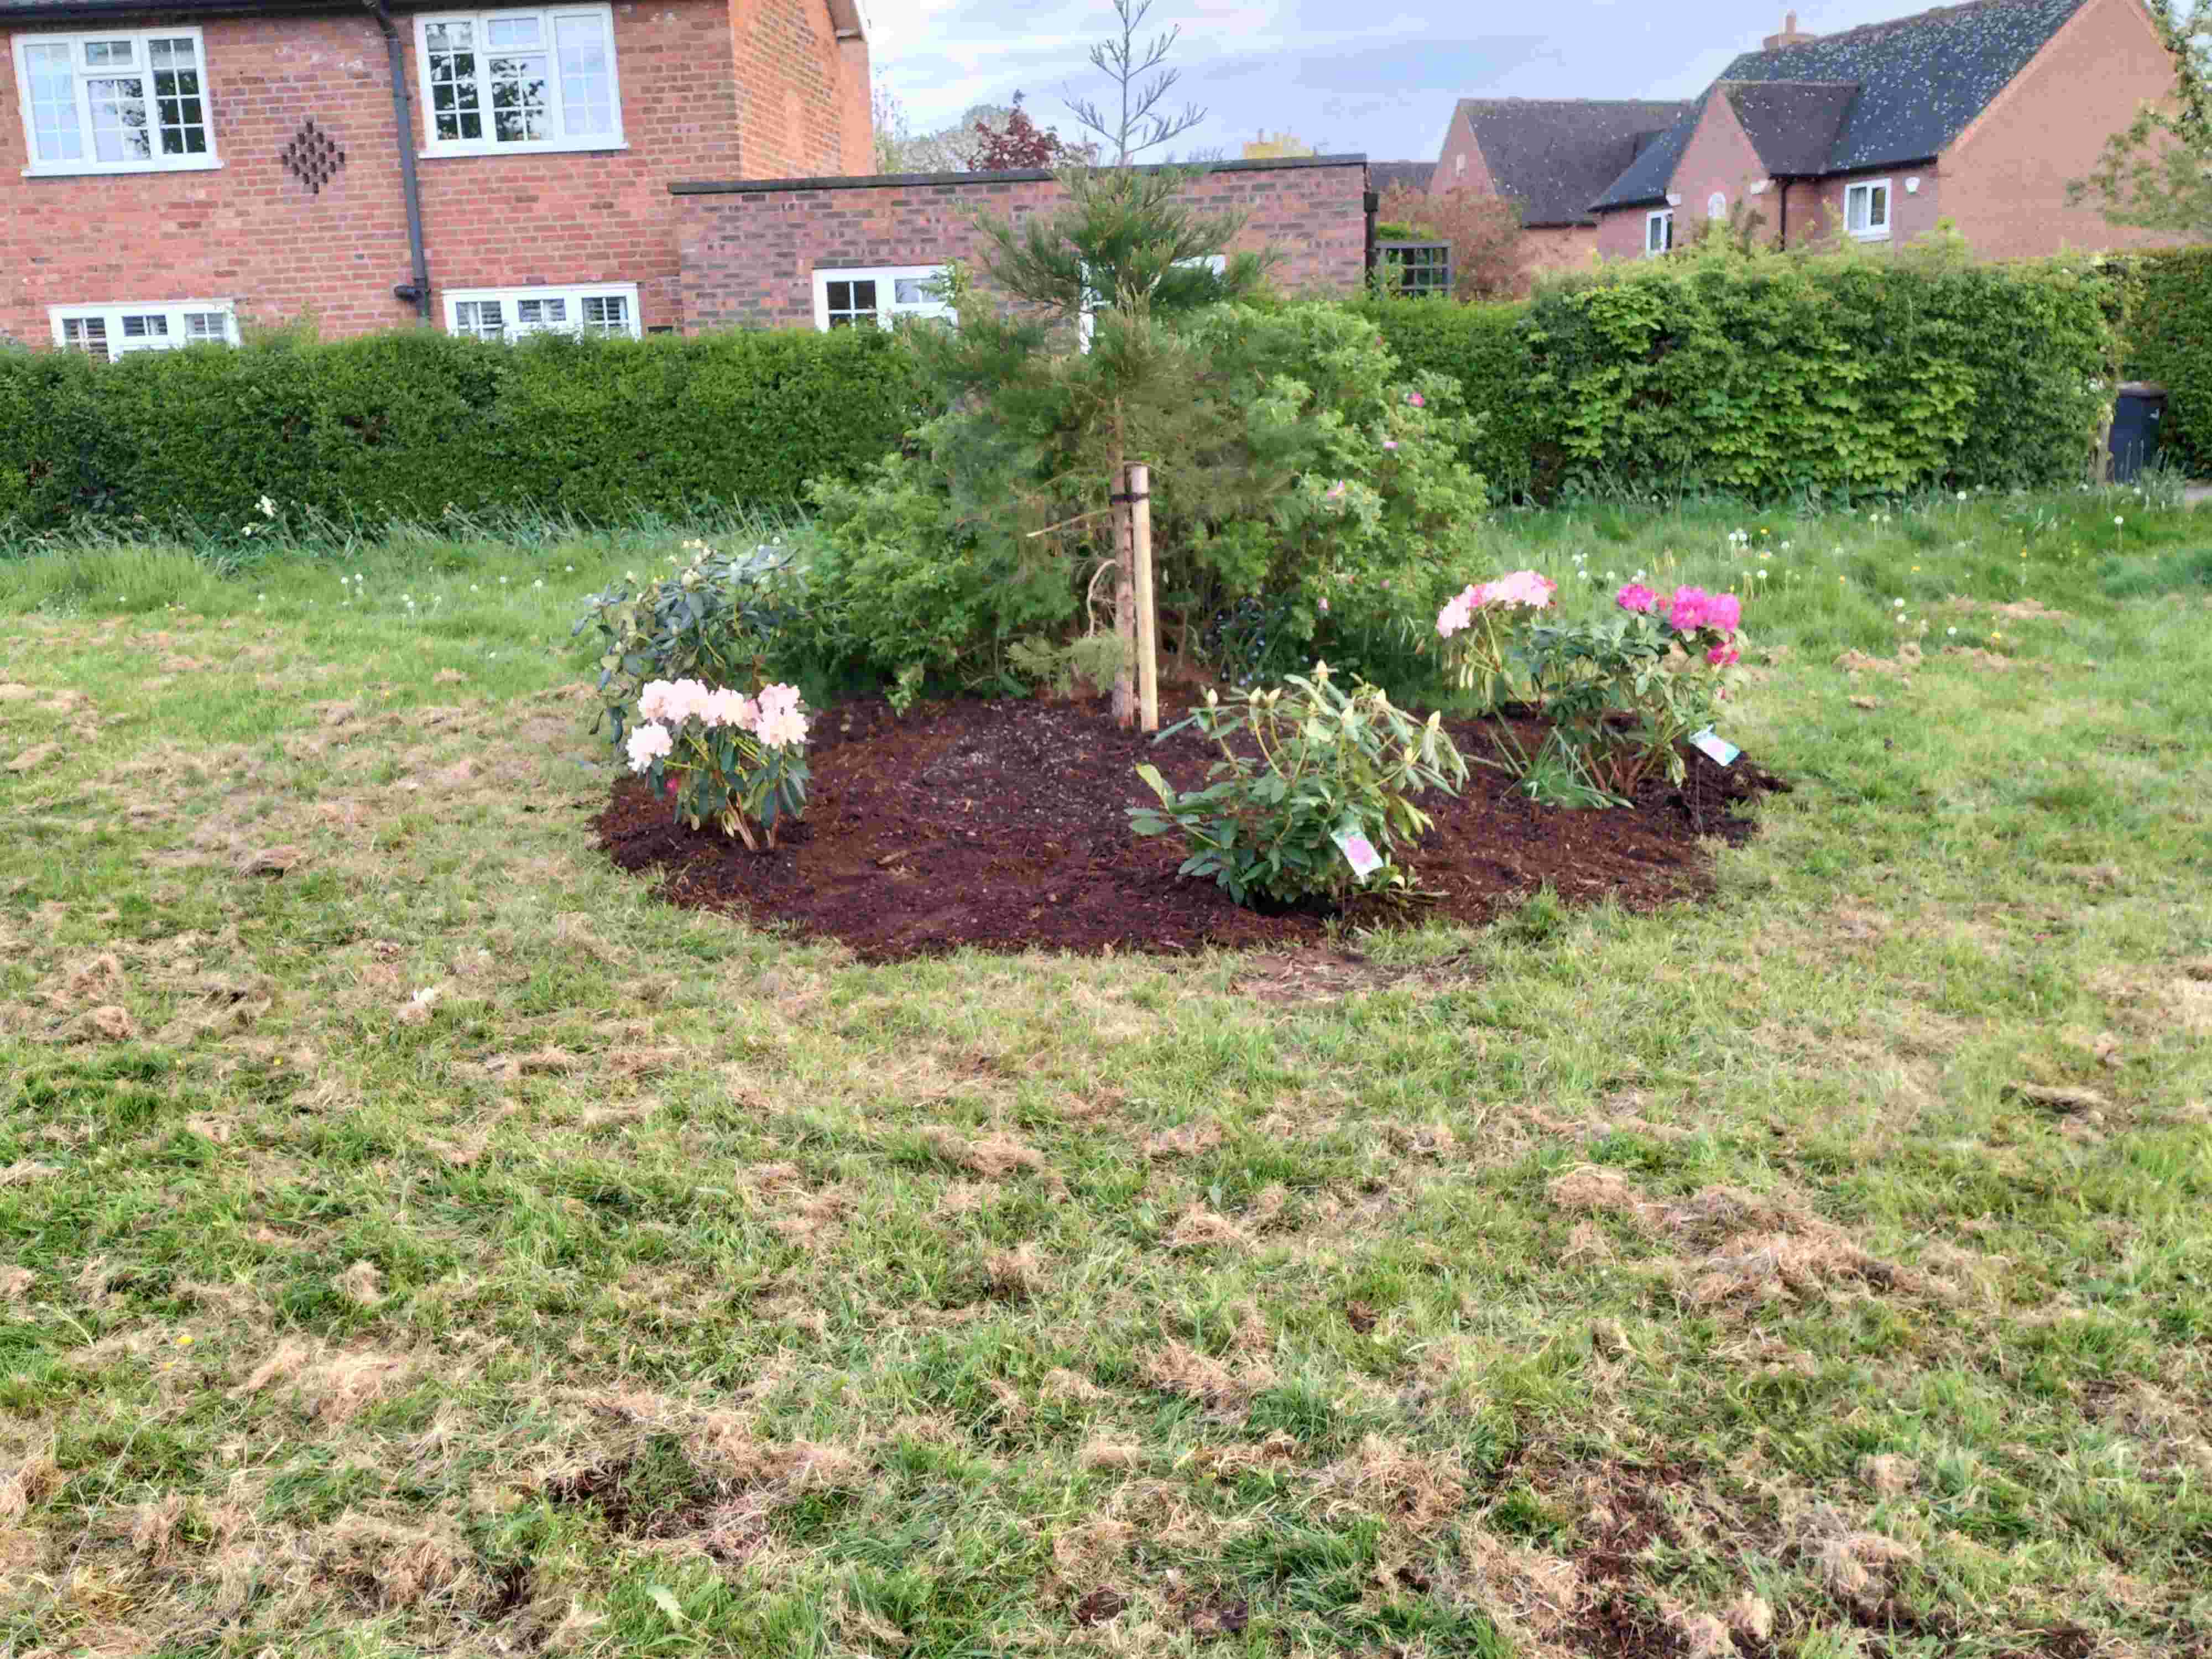 Newly planted tree on the green, May 4th